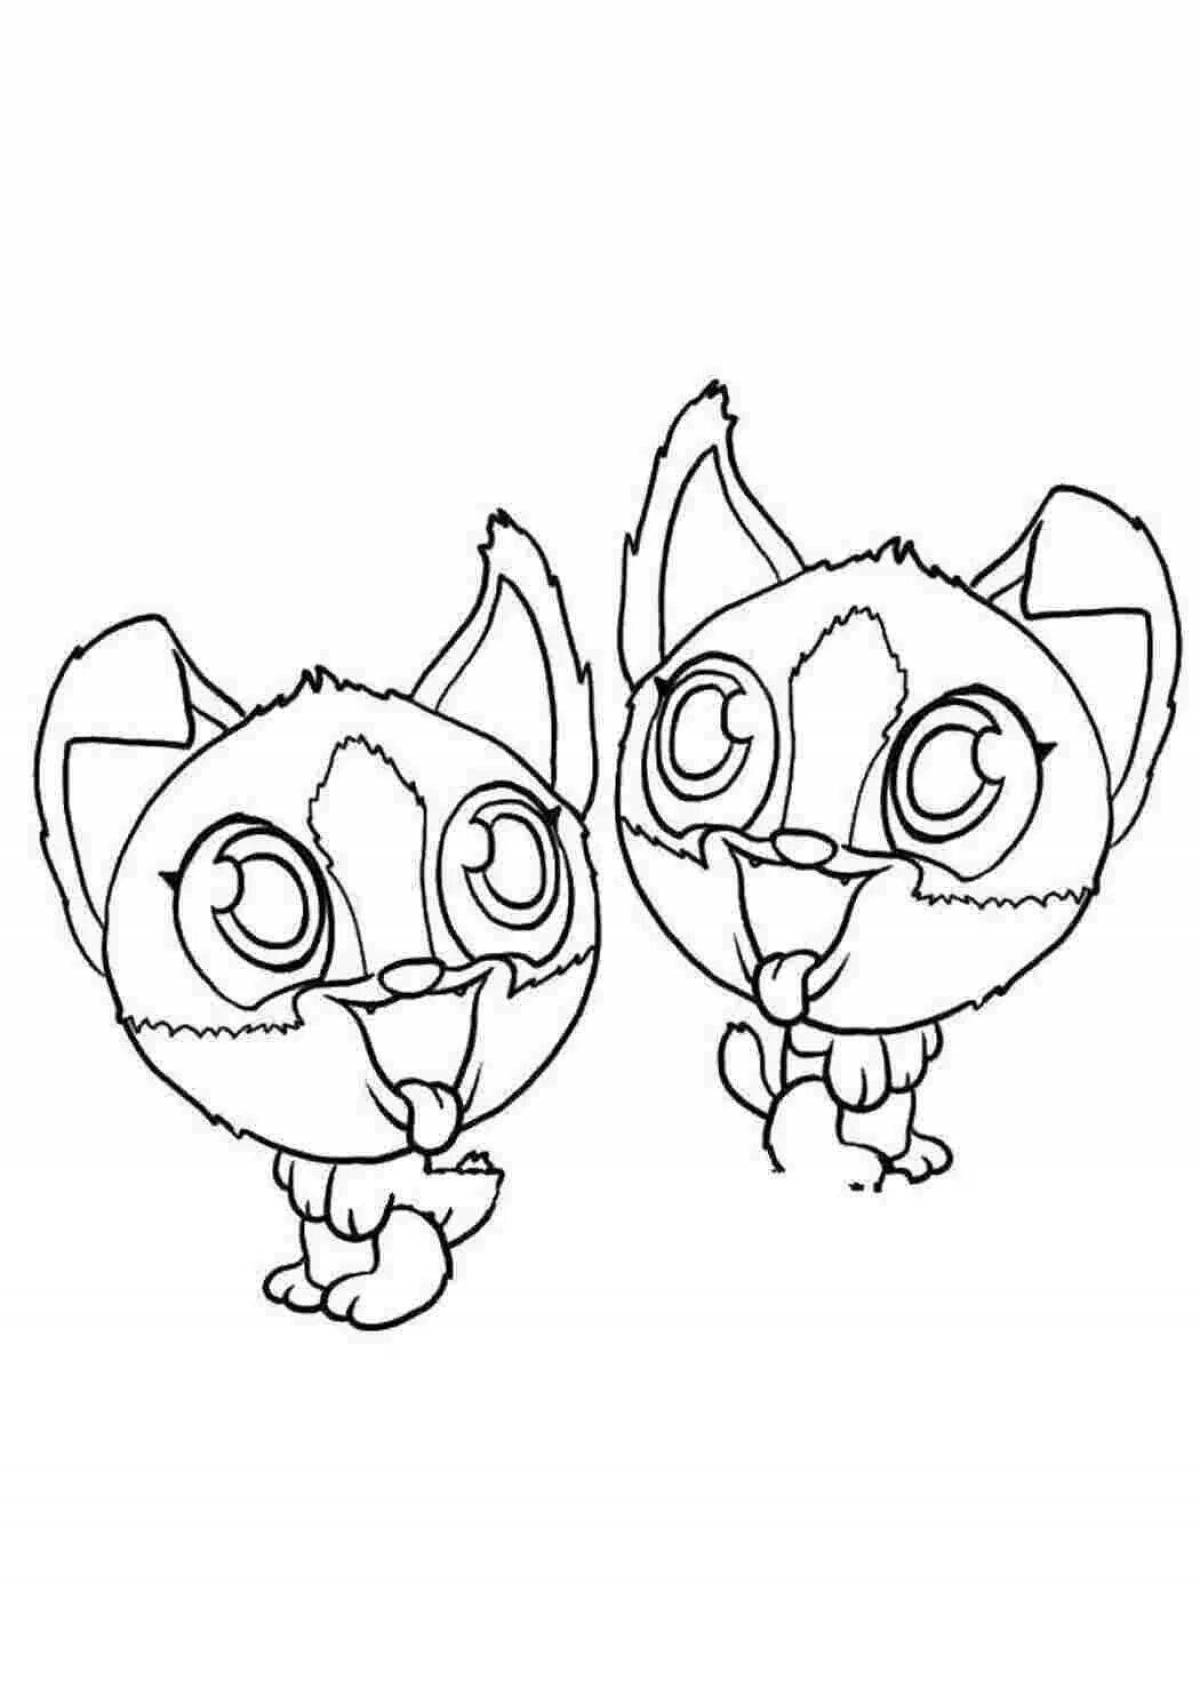 Zooble live coloring pages